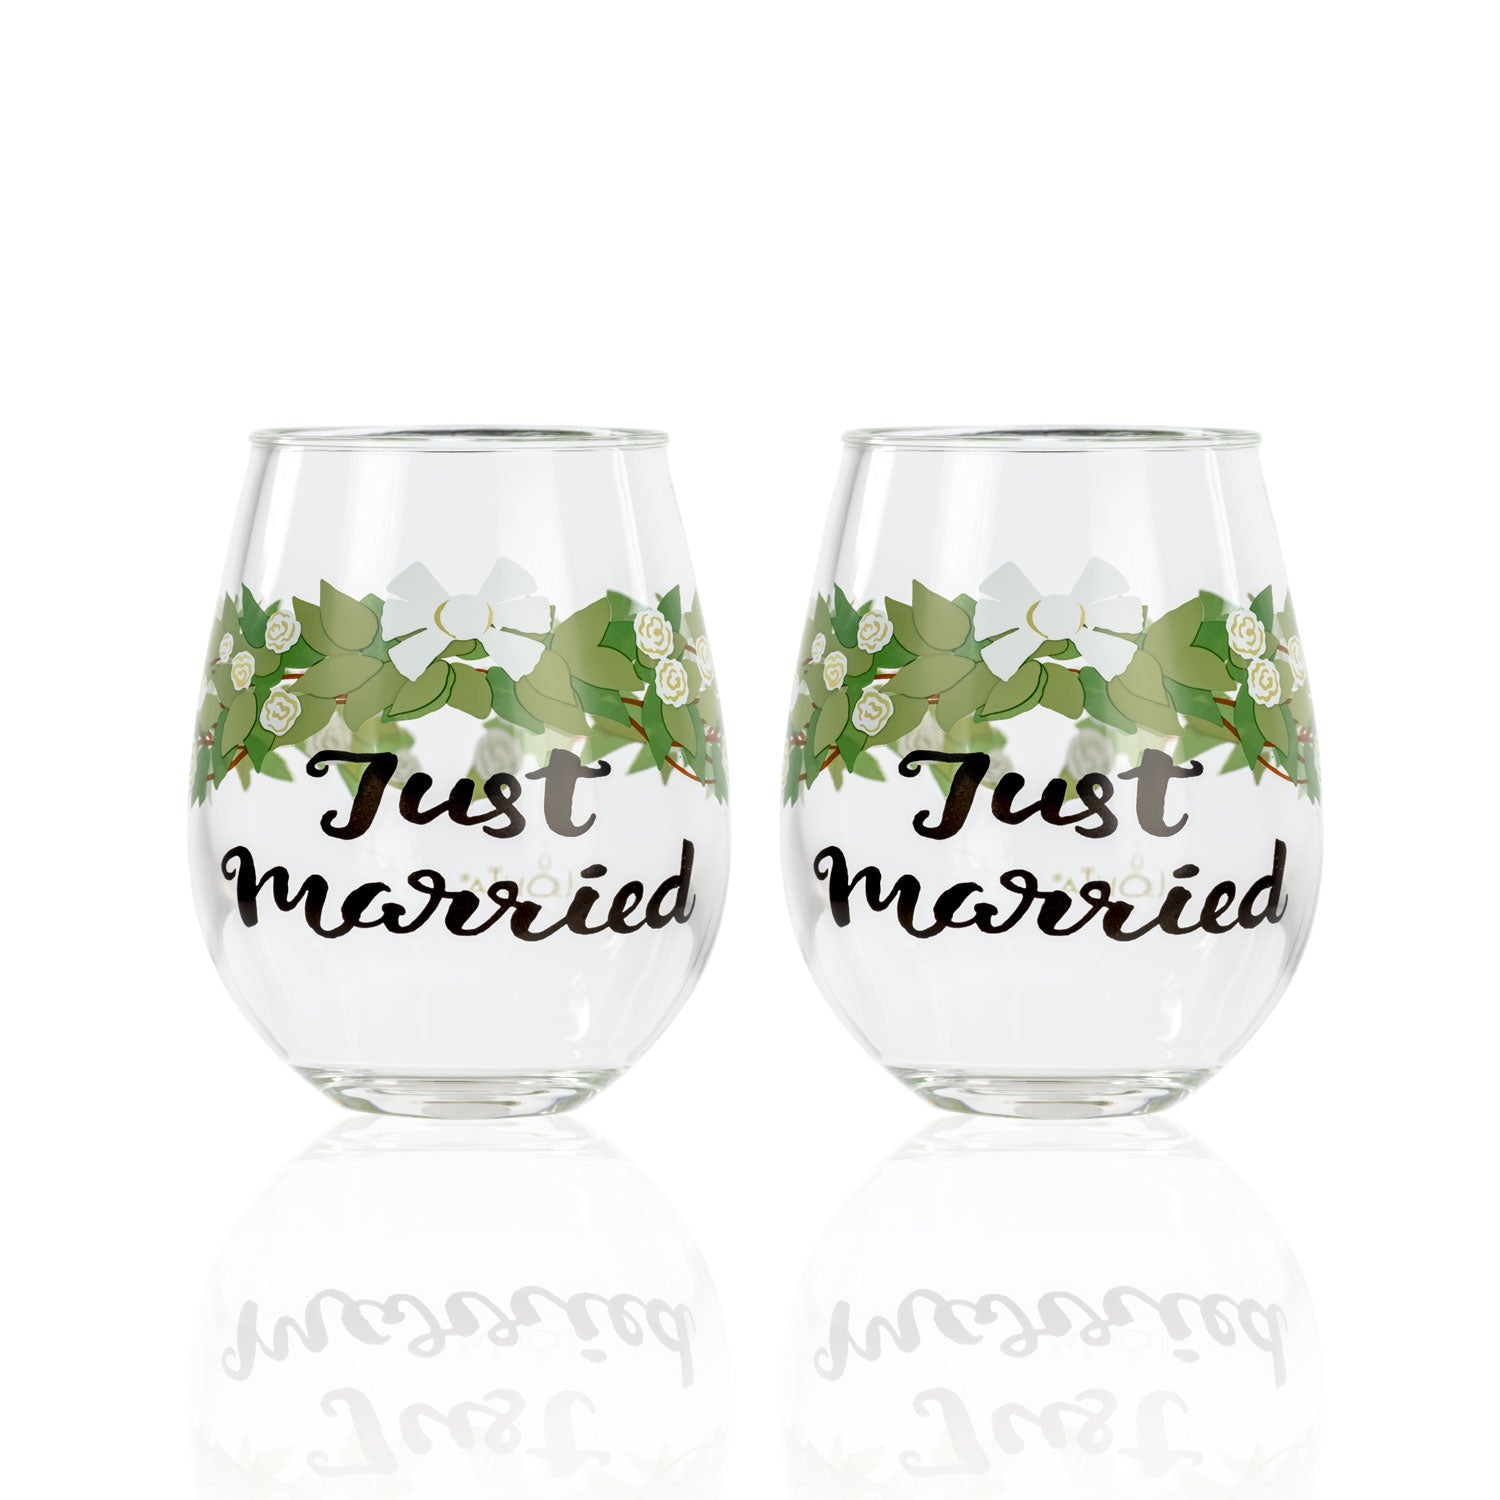 Lolita Just Married Party to go 15oz Acrylic Stemless Wine Glasses set of 2